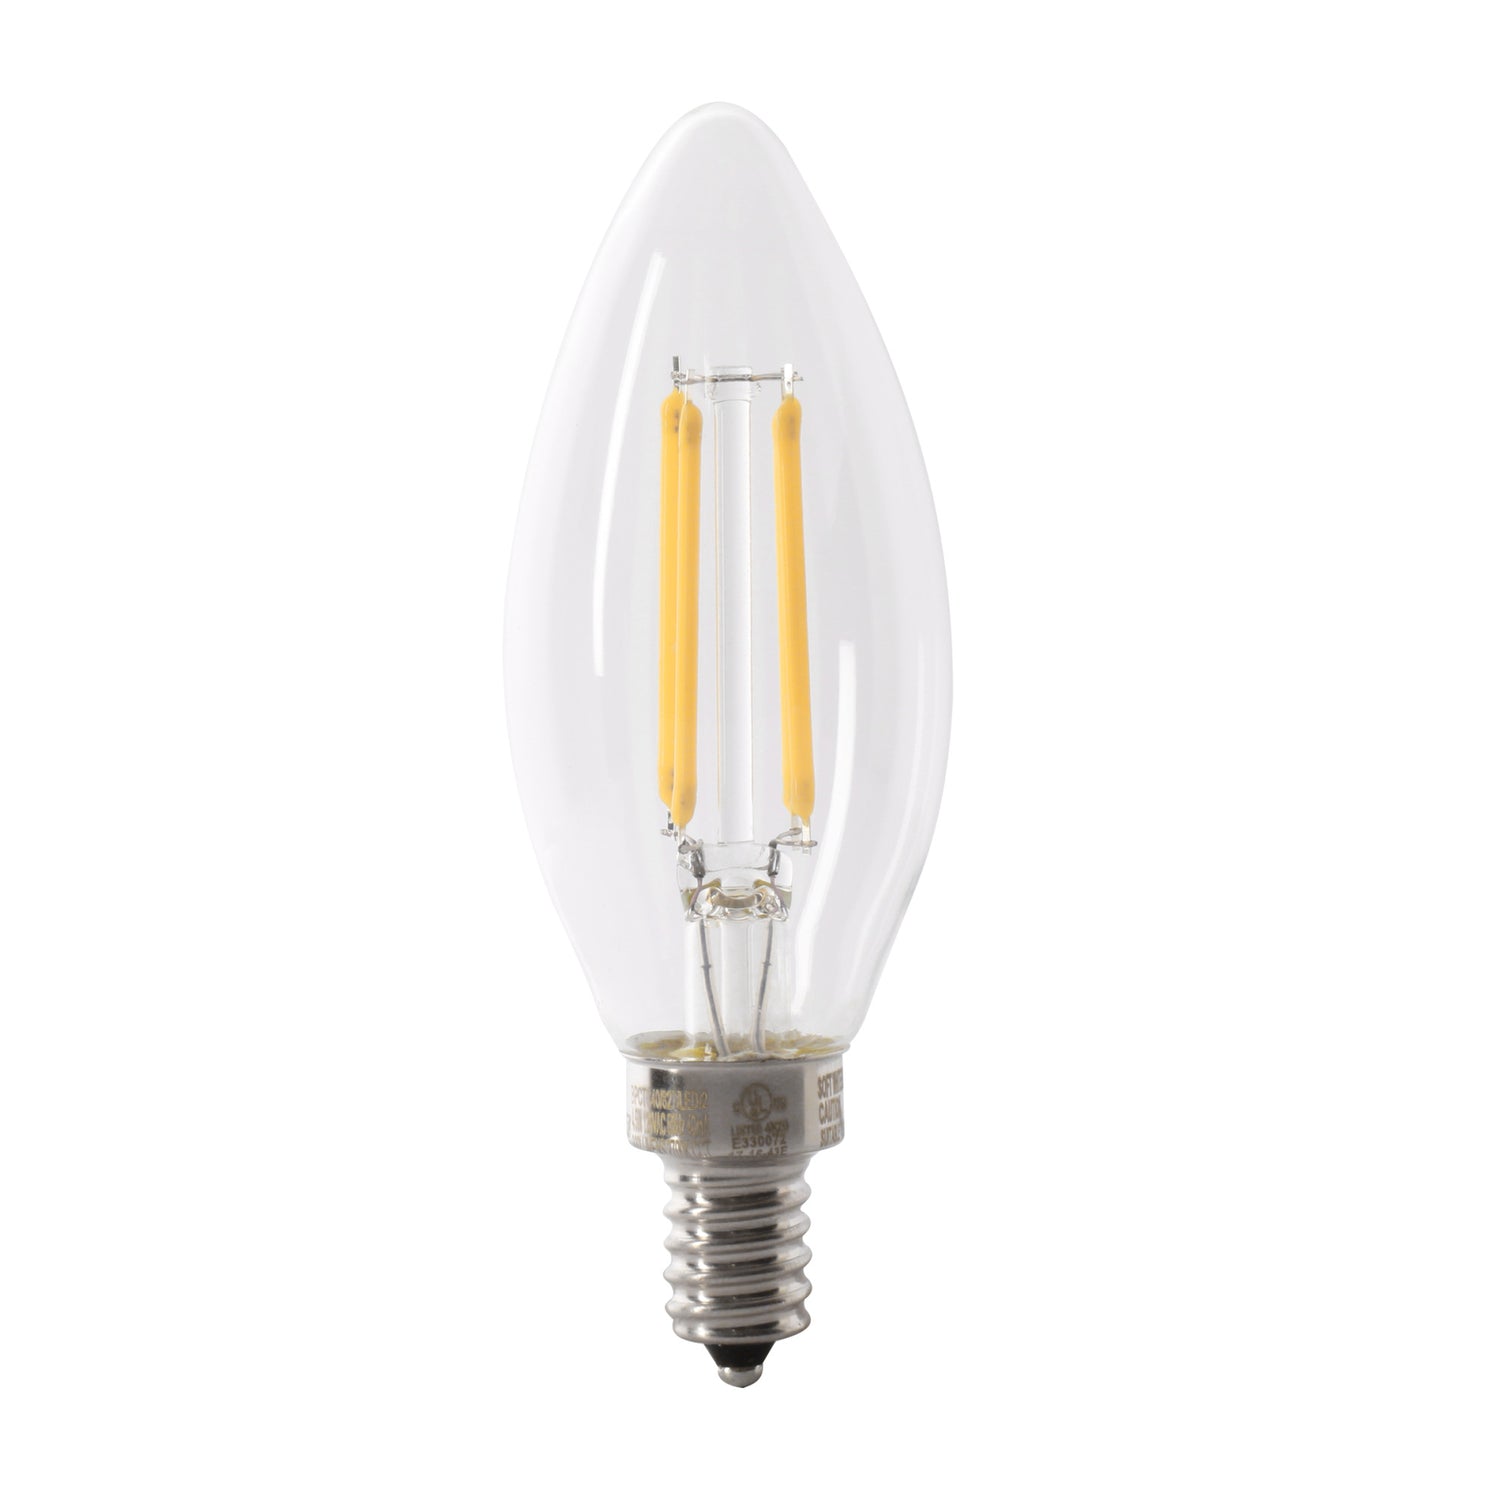 5.5W (60W Replacement) Daylight (5000K) E12 Base B10 Blunt Tip Enhance Filament LED (2-Pack)